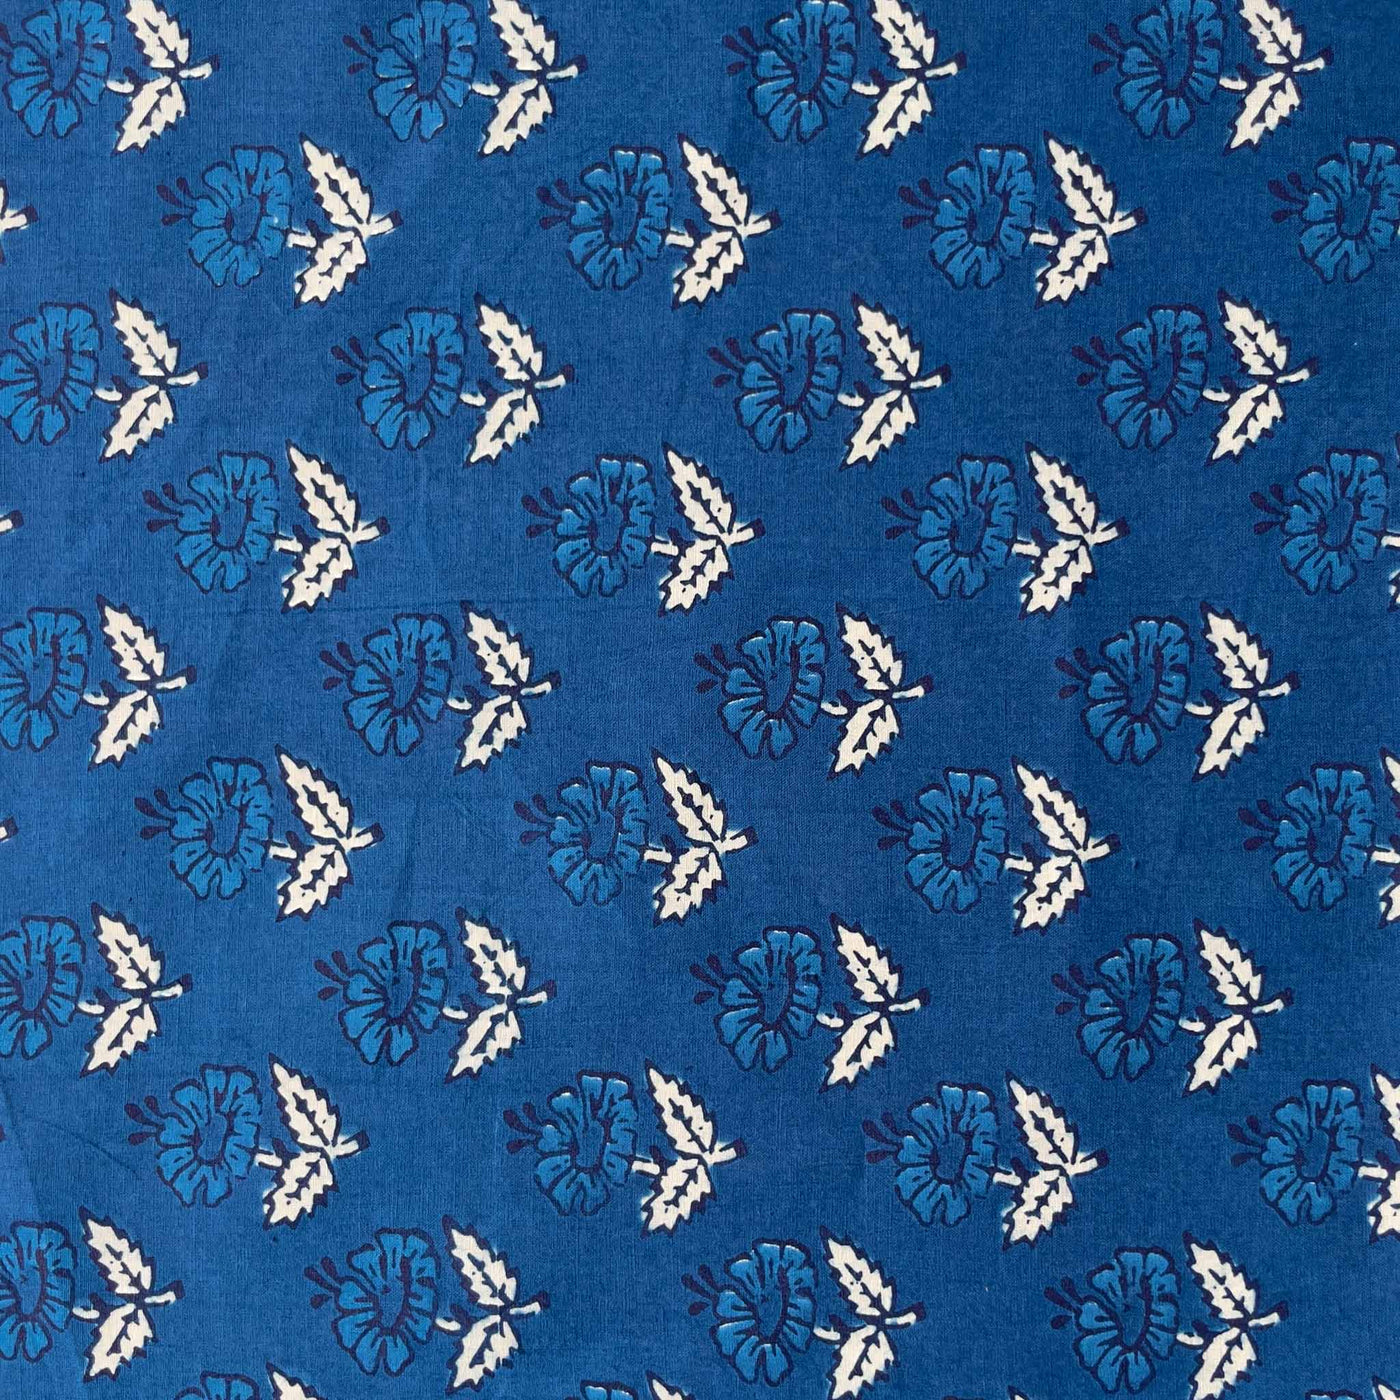 Indigo Fabric Cut Piece (CUT PIECE) Indigo Blue and White Daisies All Over Screen Printed Pure Cotton Fabric (Width 43 inches)